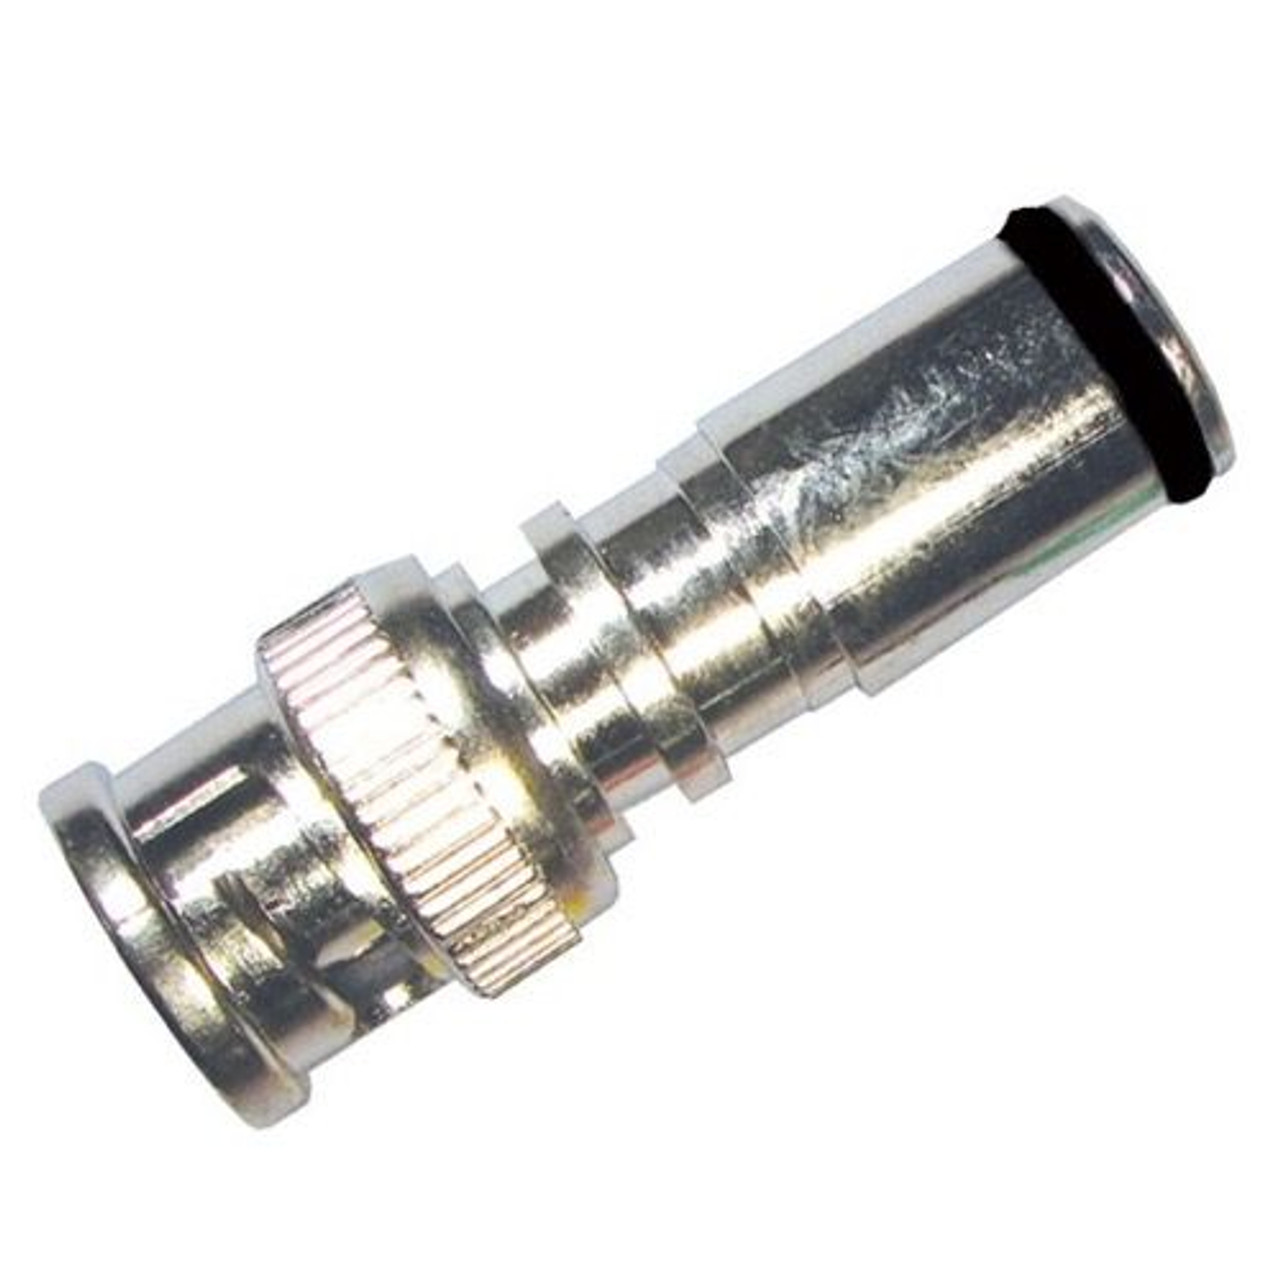 Forza 42278 BNC Compression Connector RG6 Quad Coaxial Nickel Plate Permaseal, BLACK BAND